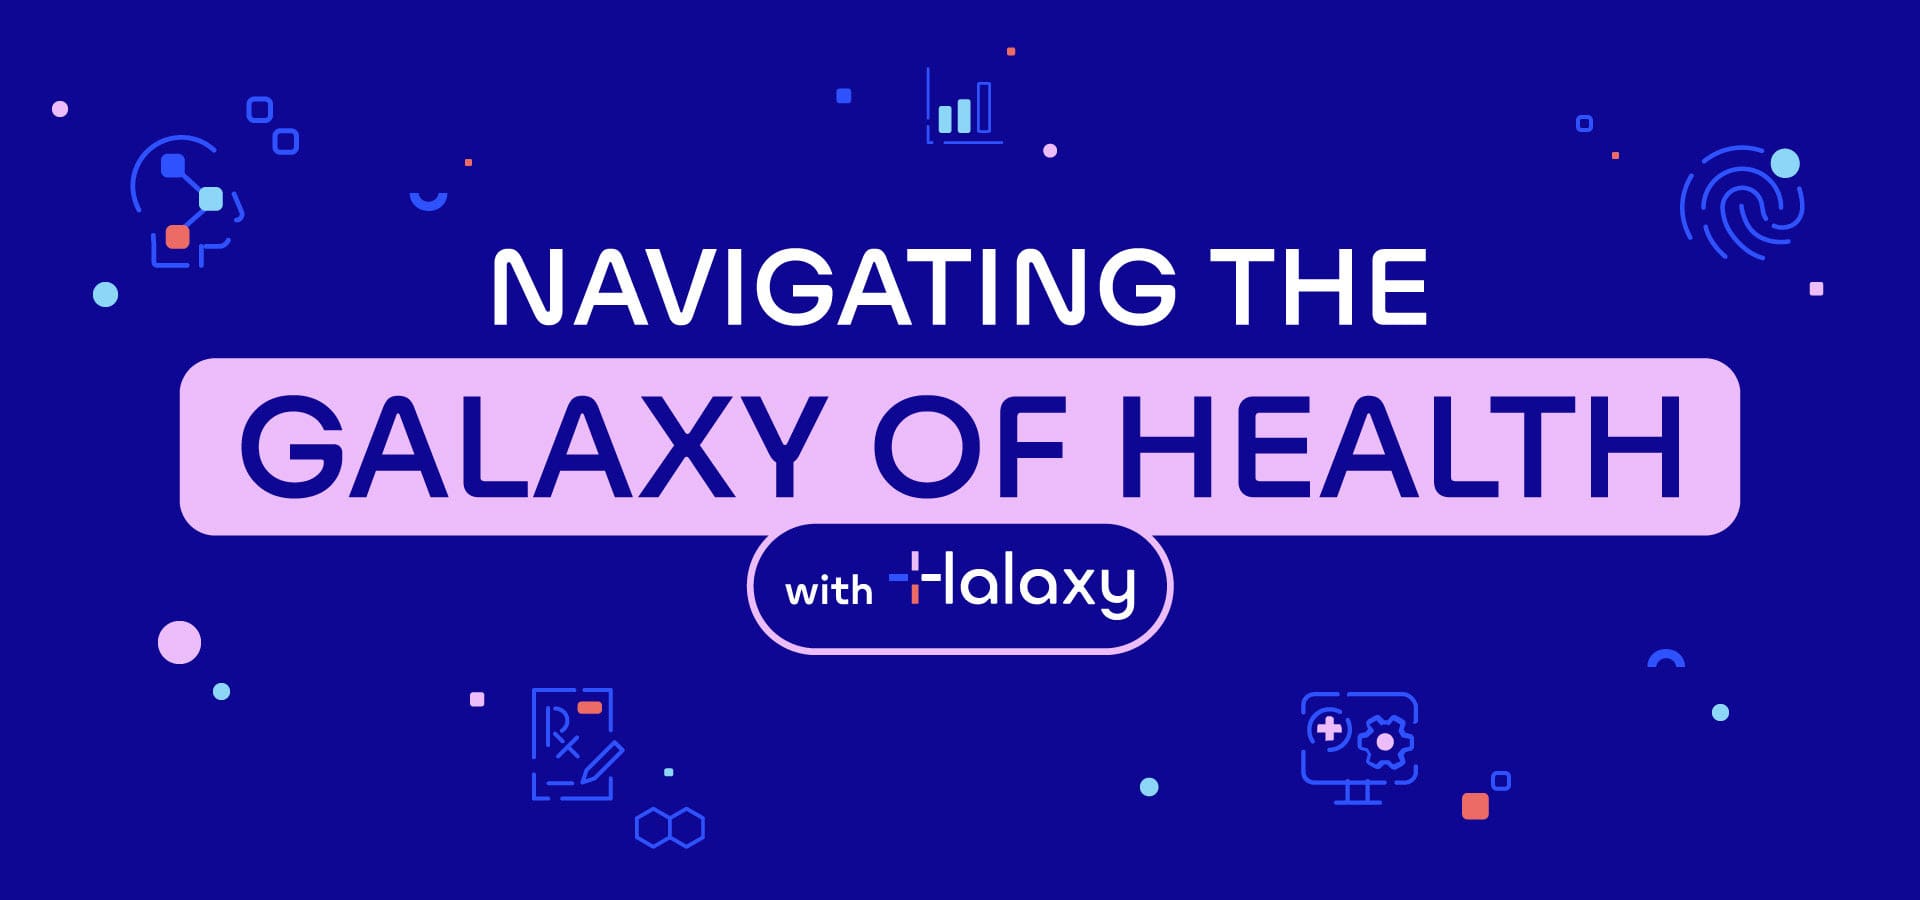 Navigating the Galaxy of Health with Halaxy (December)